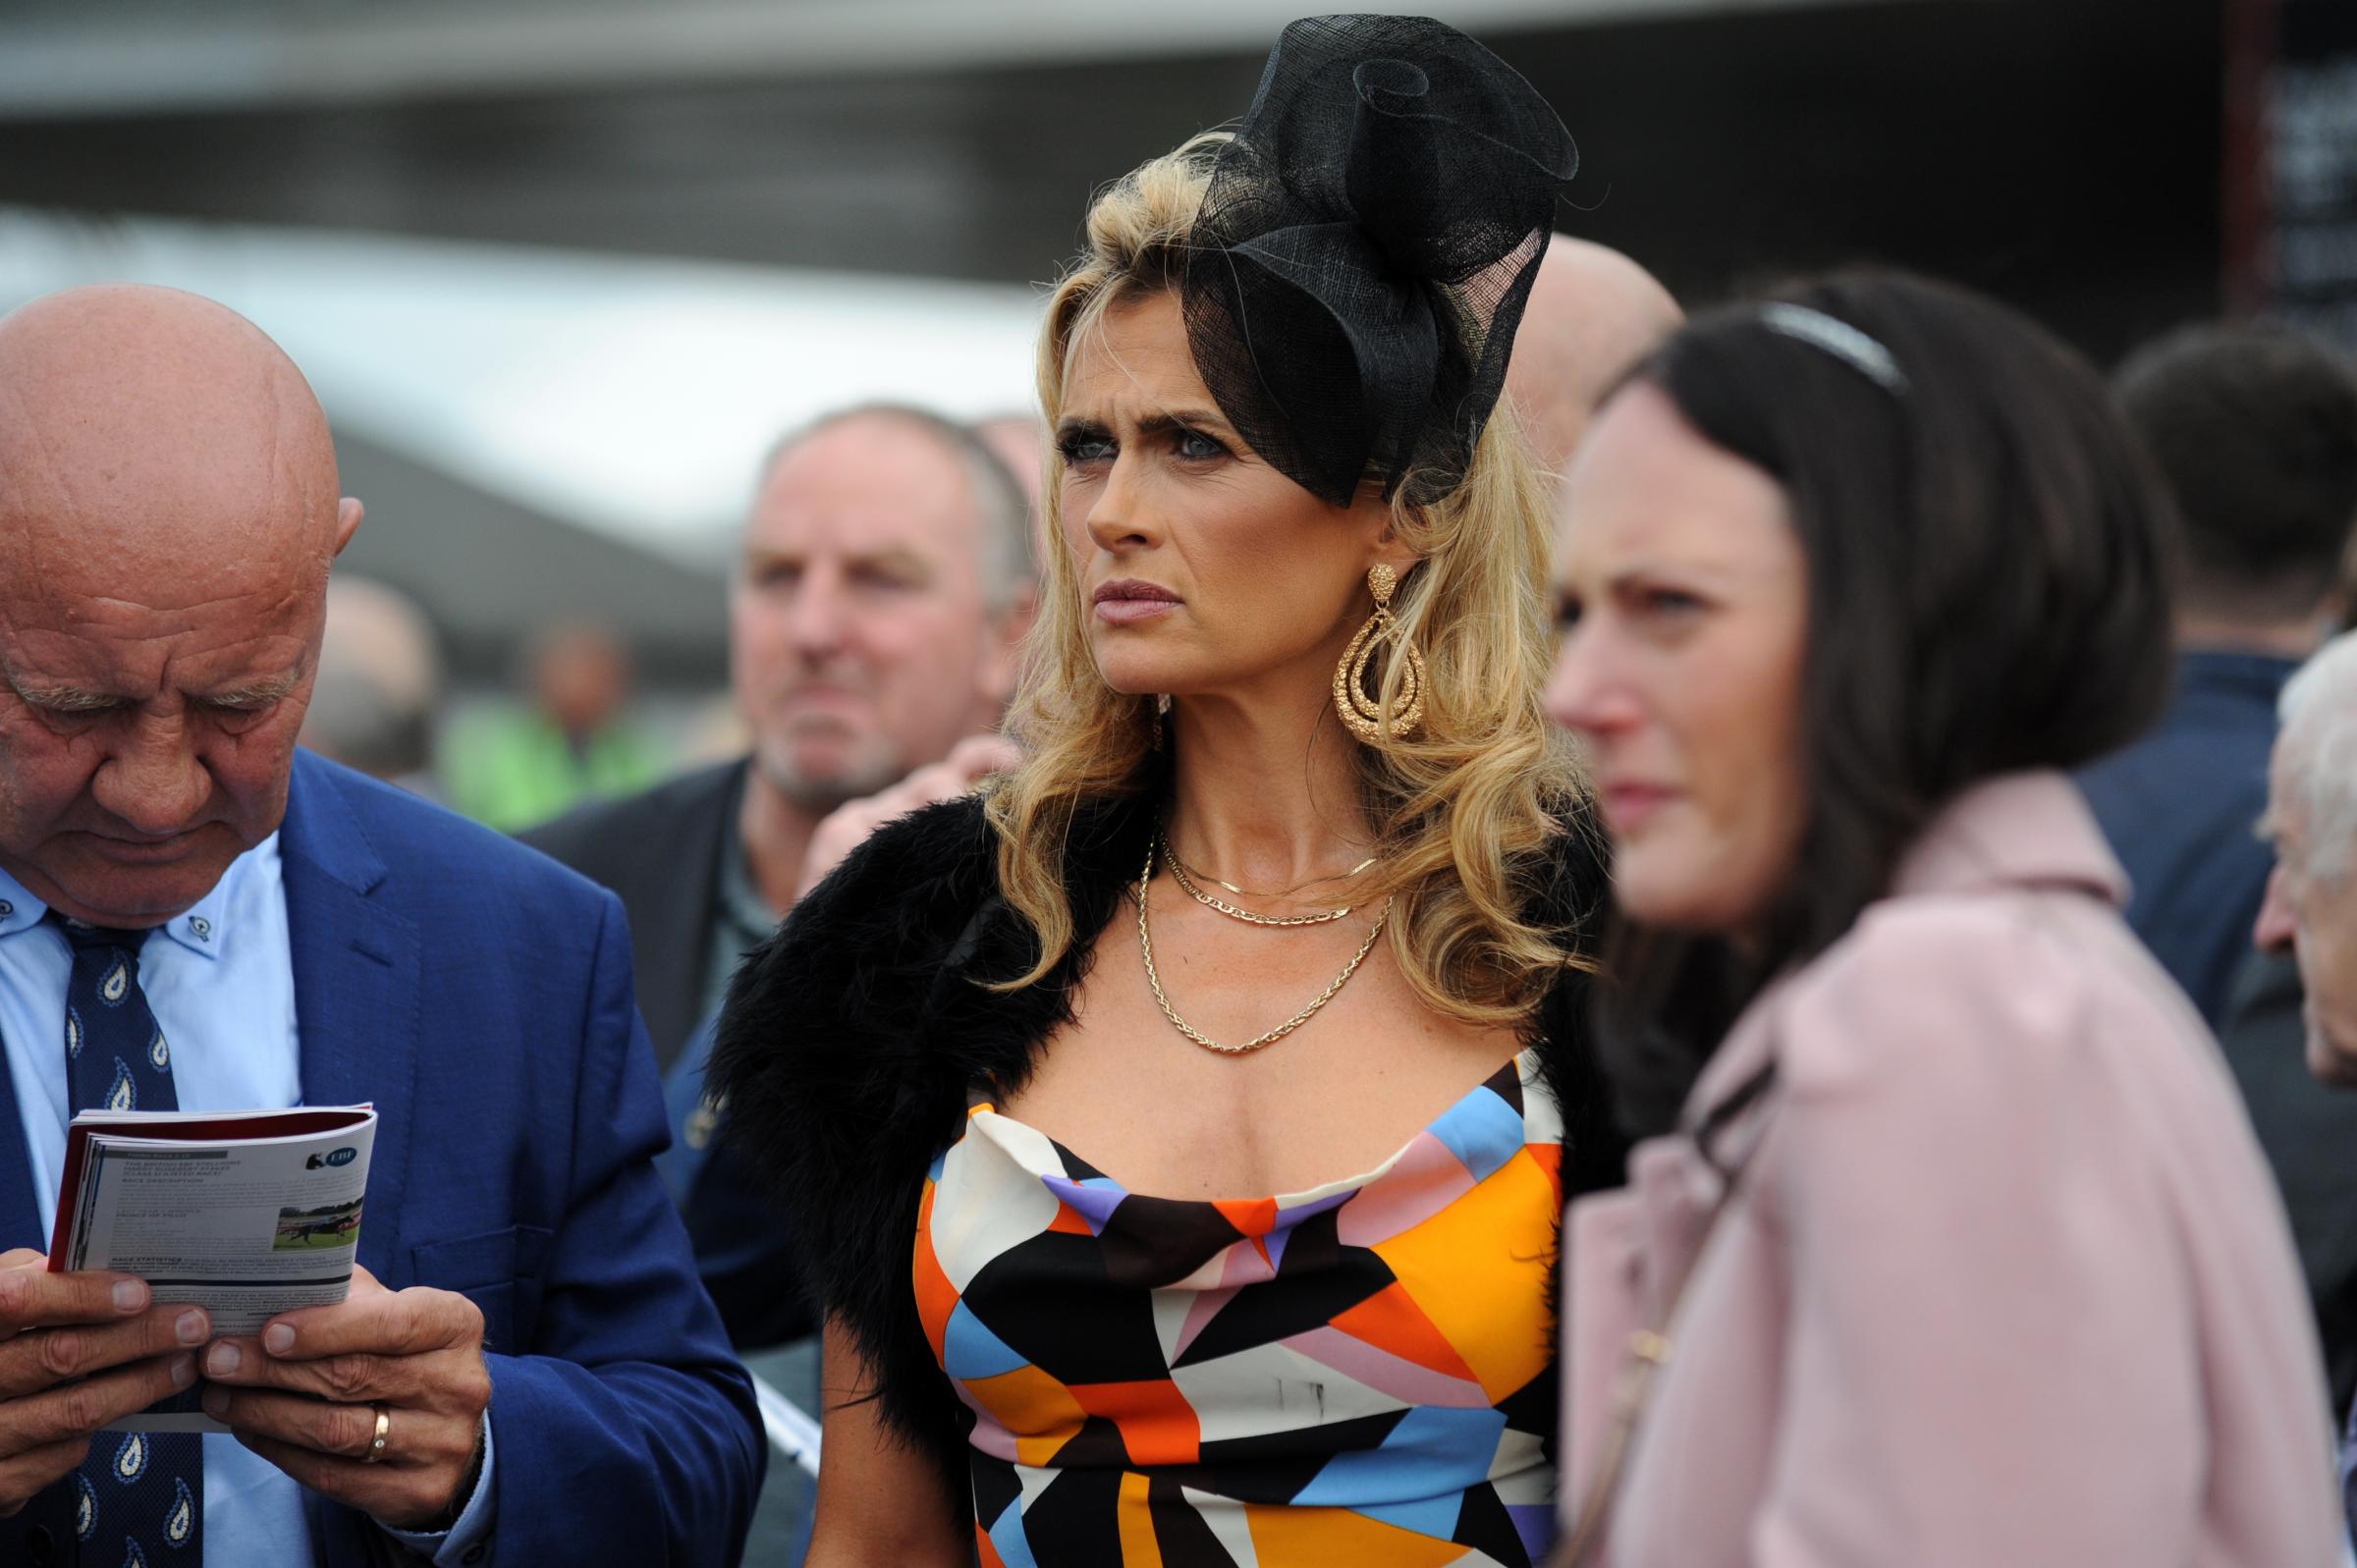 Ladies Day at the Virgin Bet Ayr Gold Cup Festival at Ayr racecourse on Friday, September 22 (Photo: Charlie Gilmour)